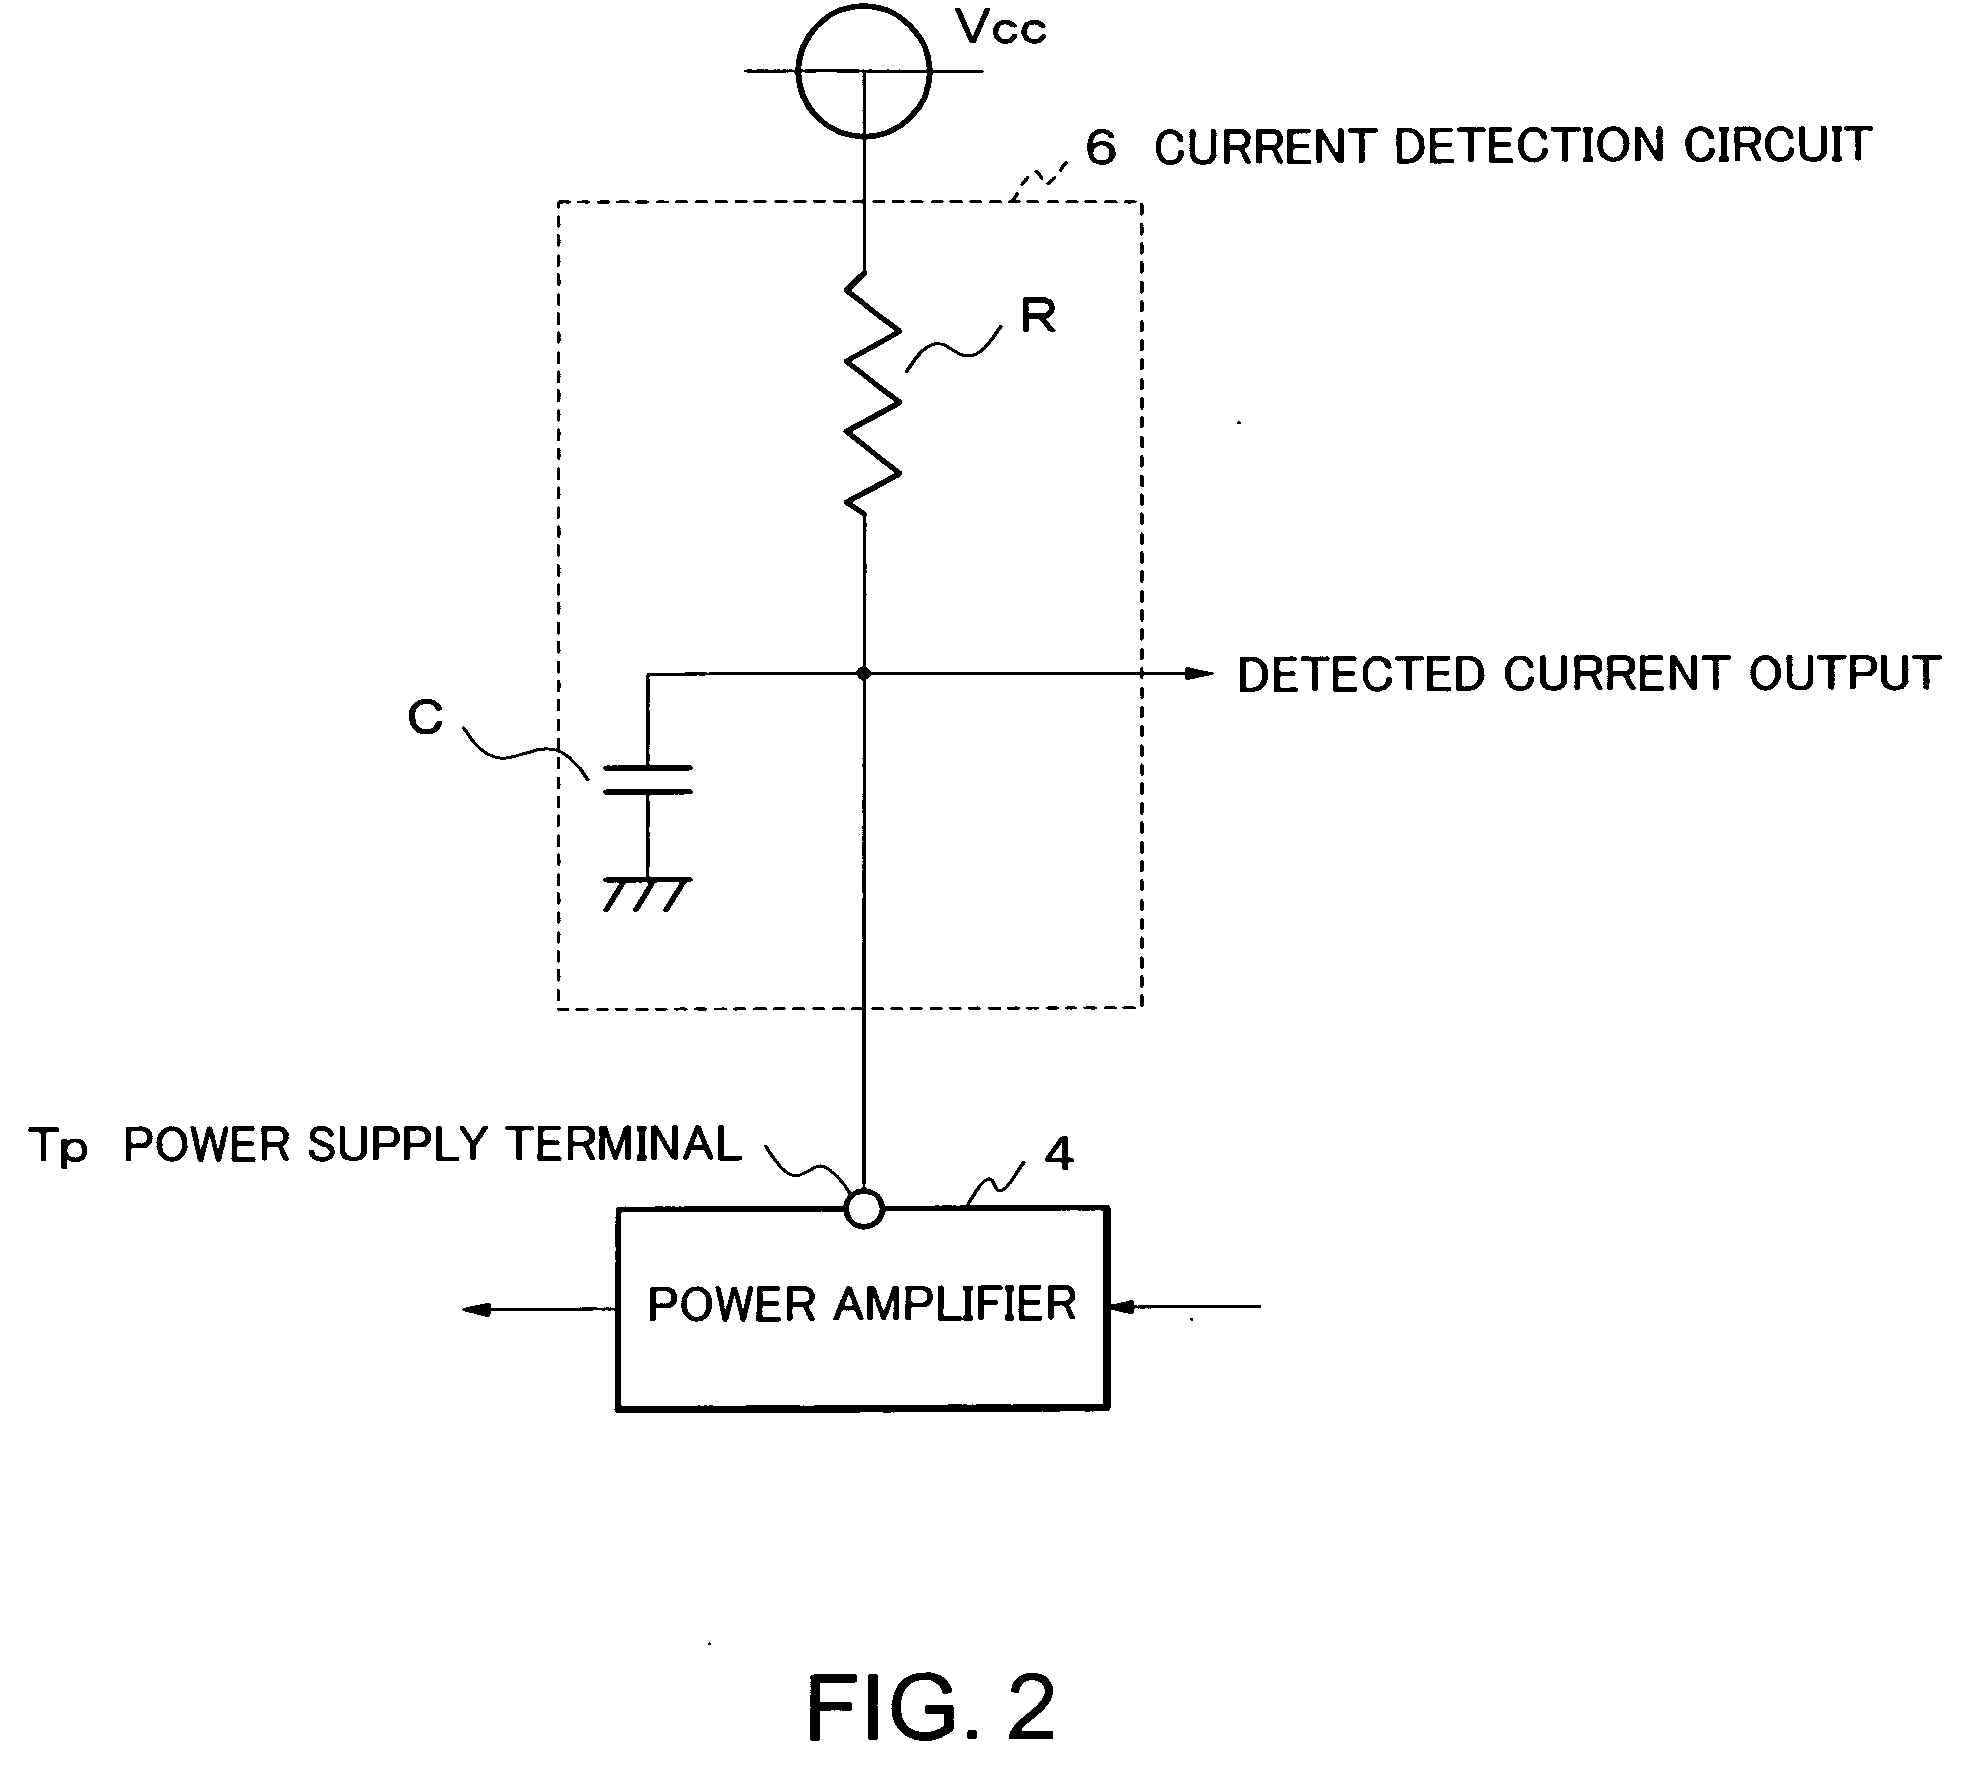 Transmission power control device and method thereof, computer program for transmission power control device, and radio transmitter